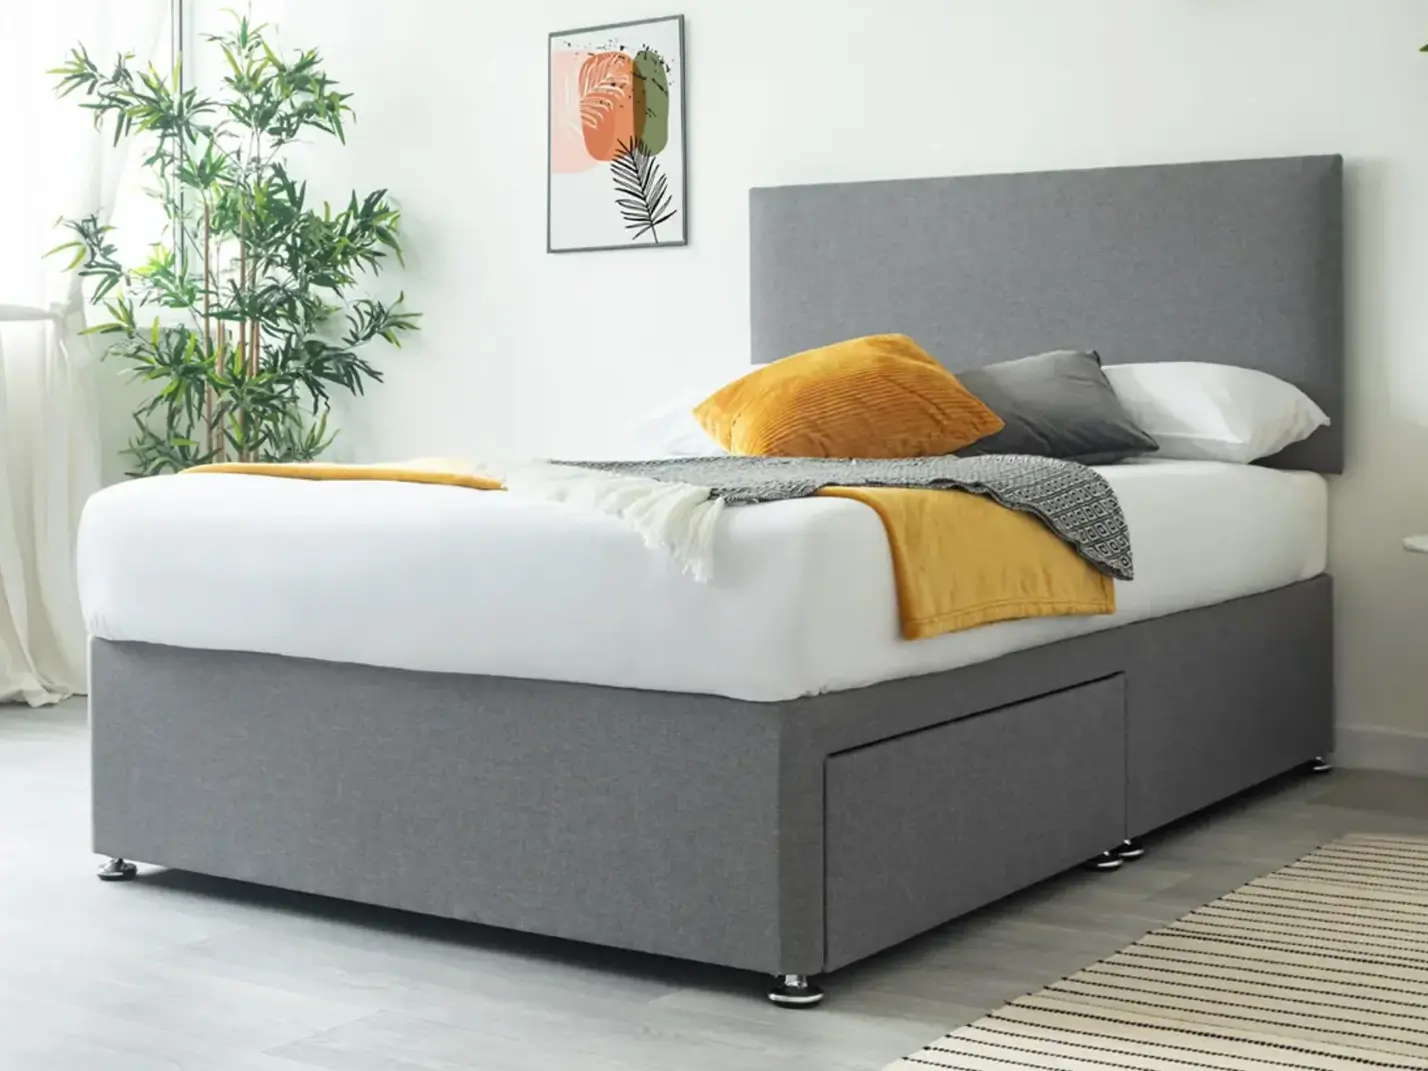 5 Reasons Why Divan Beds are Excellent